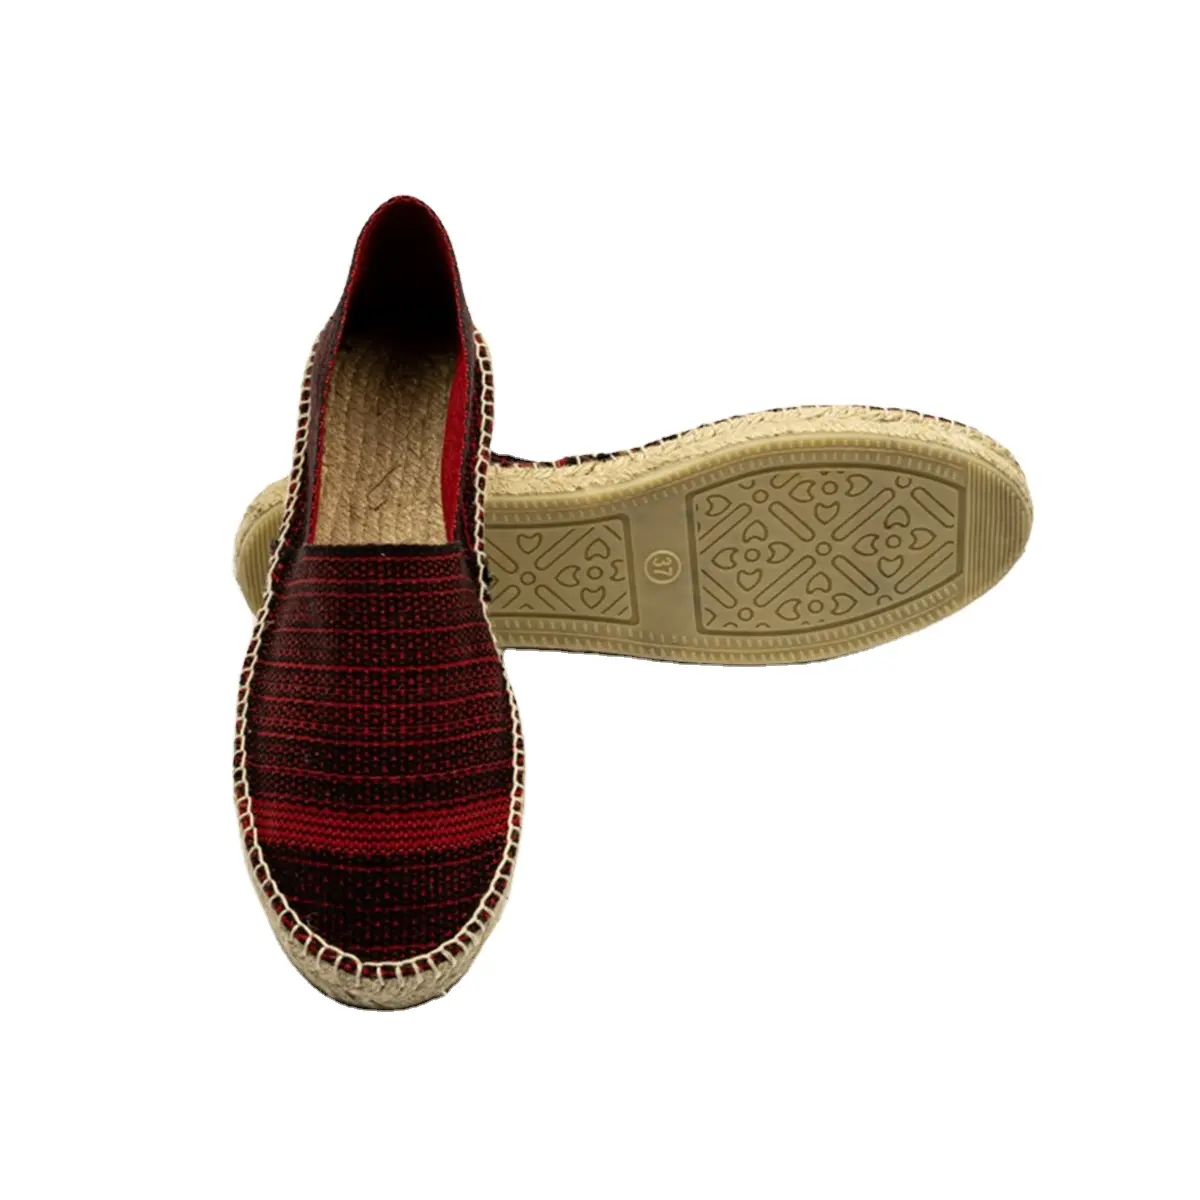 New Women Espadrilles Flats Outdoor Casual Women Breathable Fashion Flats Espadrilles Platform Loafers Shoes New From Bangladesh